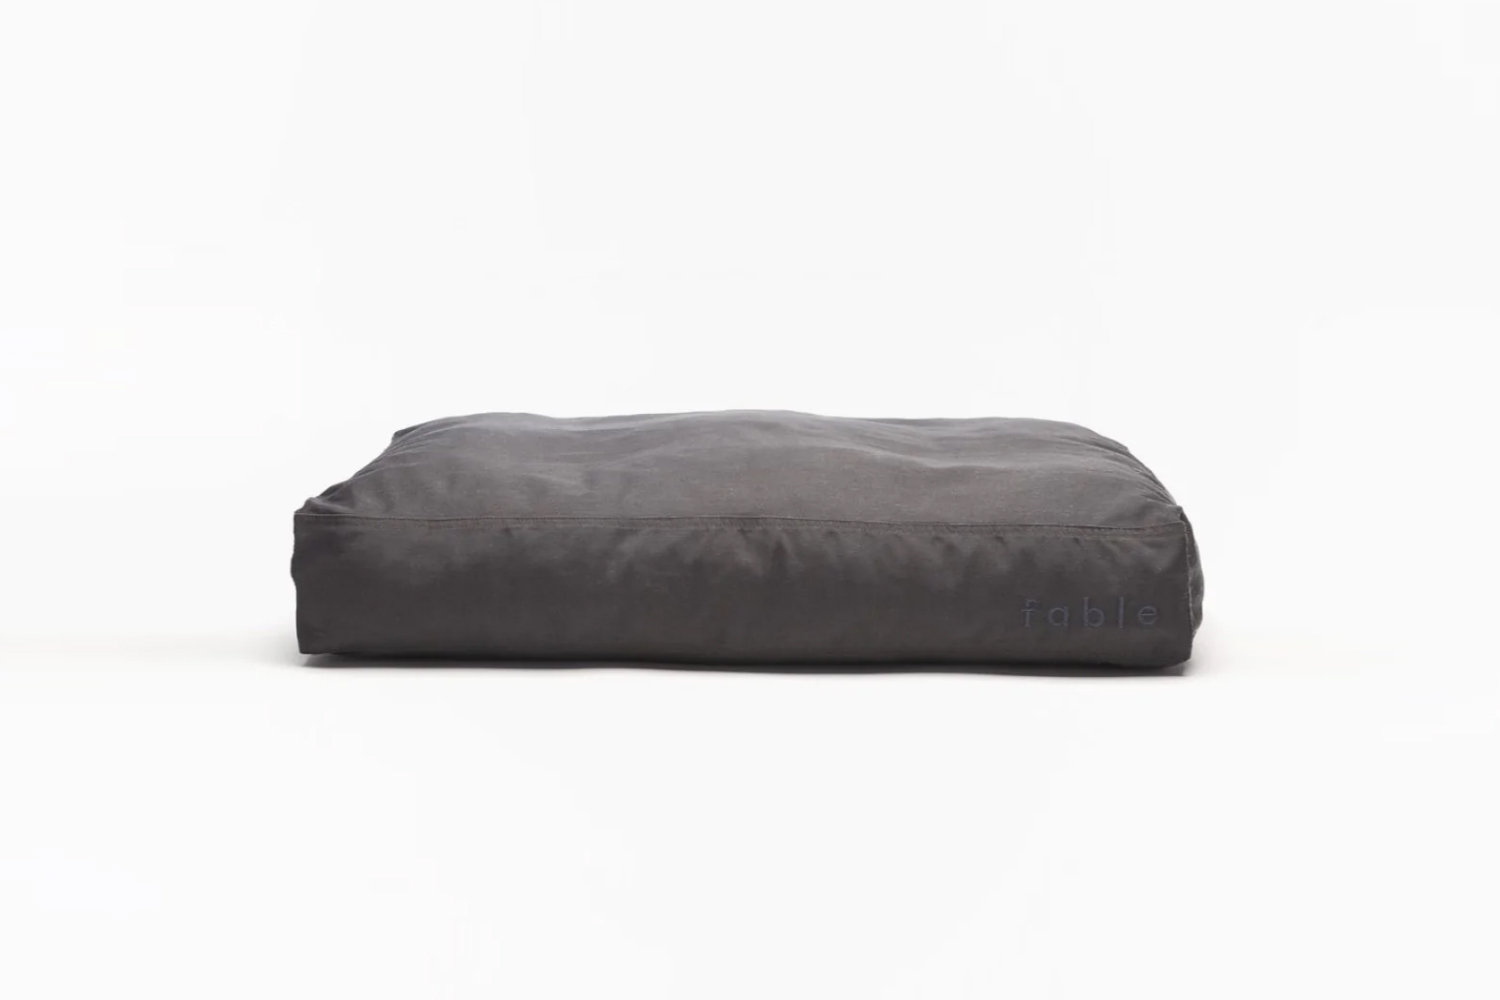 the fable dog bed in dark shadow starts at \$95. 22